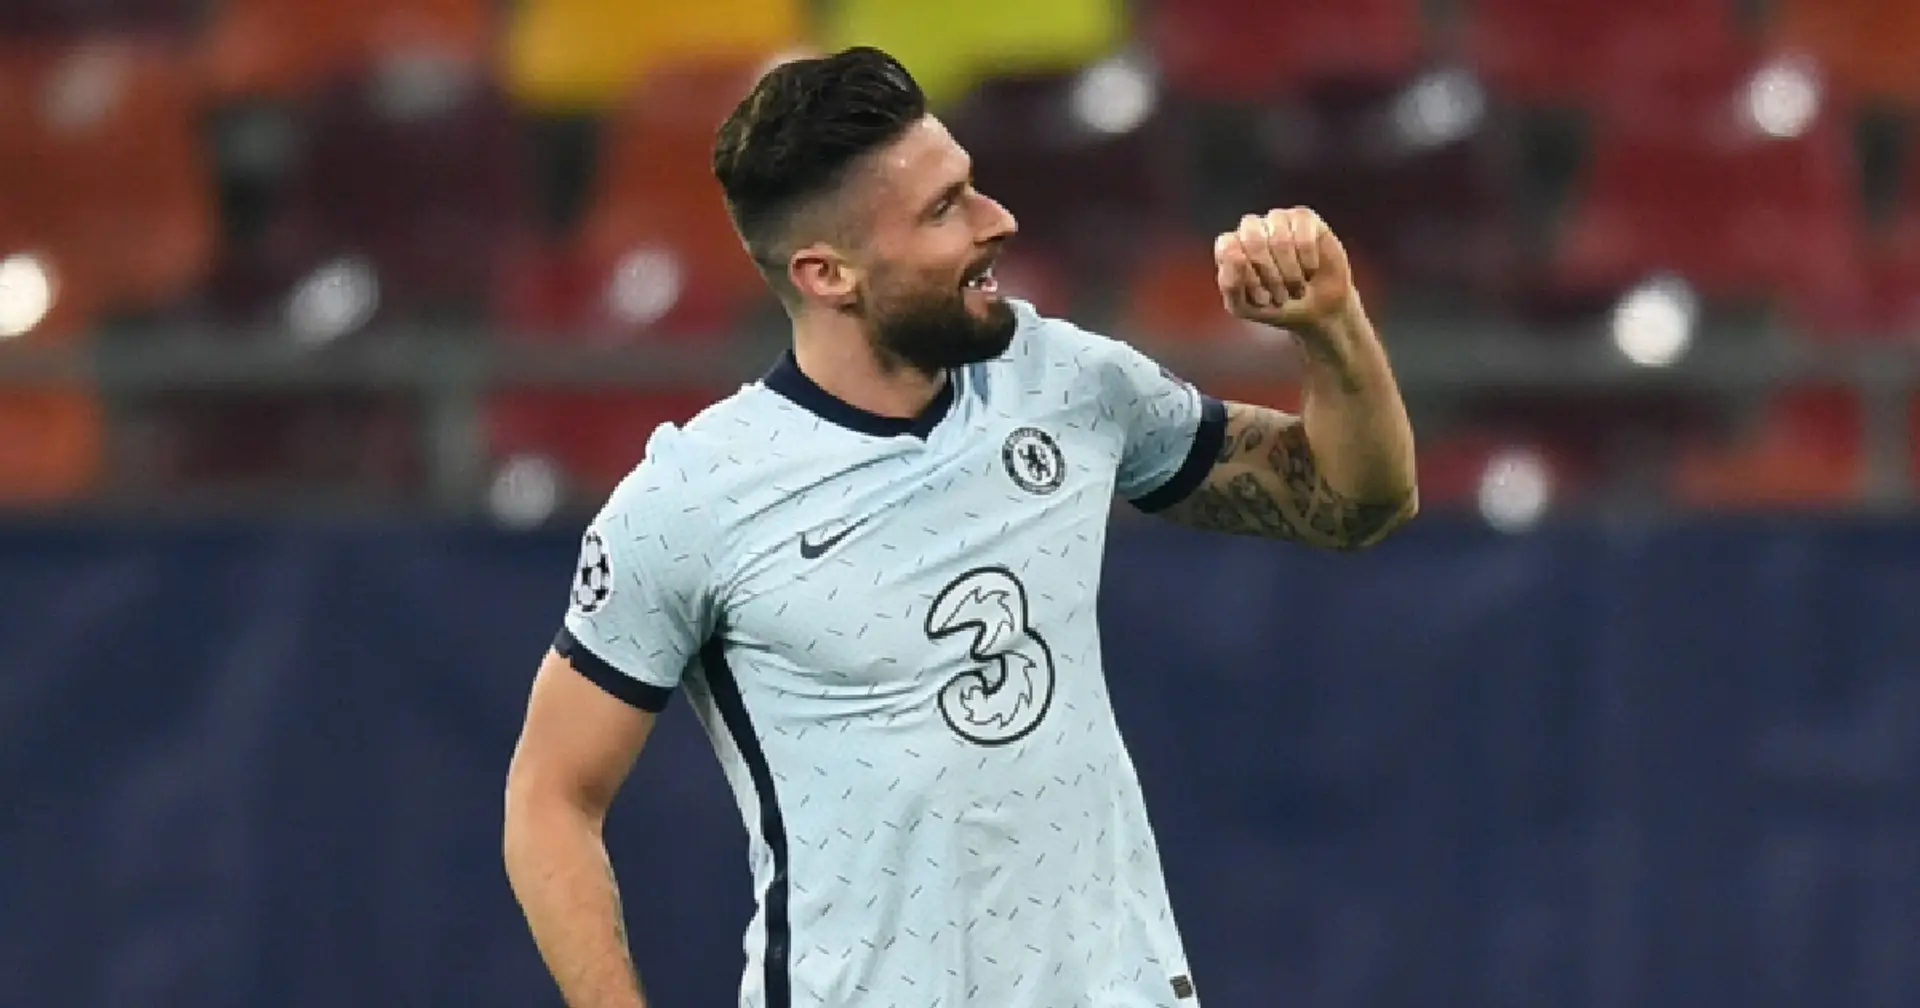 'Giroud is the best underrated player in the world': Tony Cascarino